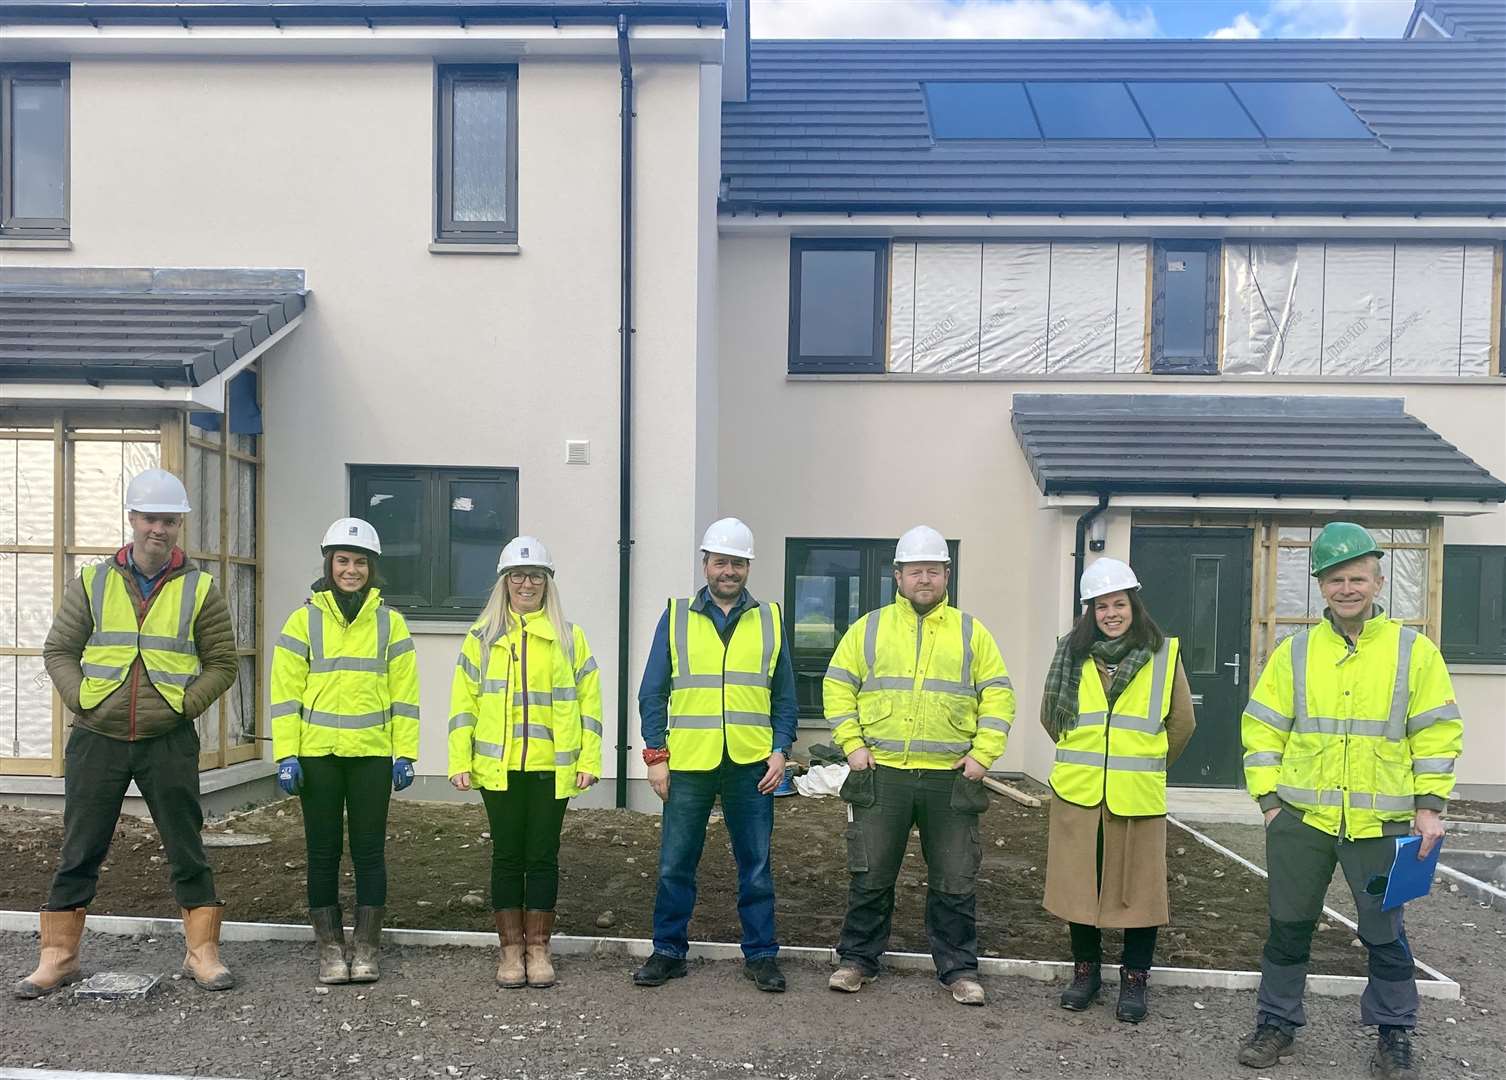 Some of those involved in the project – including Mark Tate (centre) gathered at the homes in Aviemore as they took shape towards the end of last year.